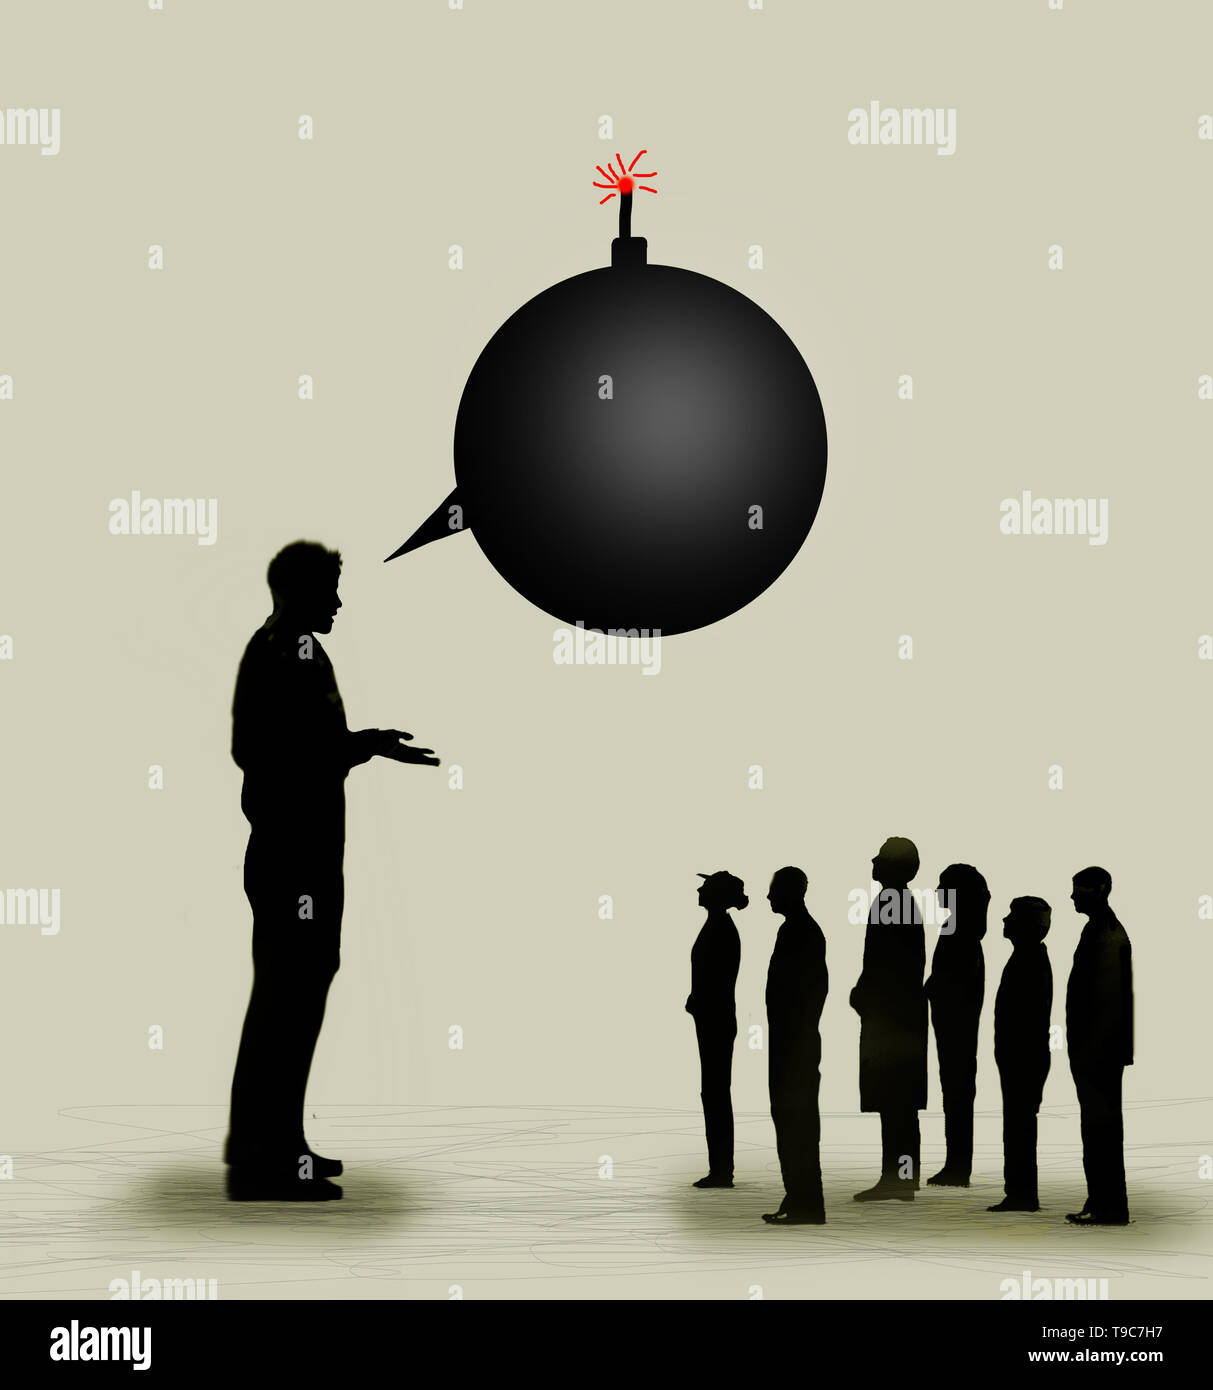 large man with a speech bubble in the shape of a bomb talking to a group of smaller people implying bad news . Stock Photo